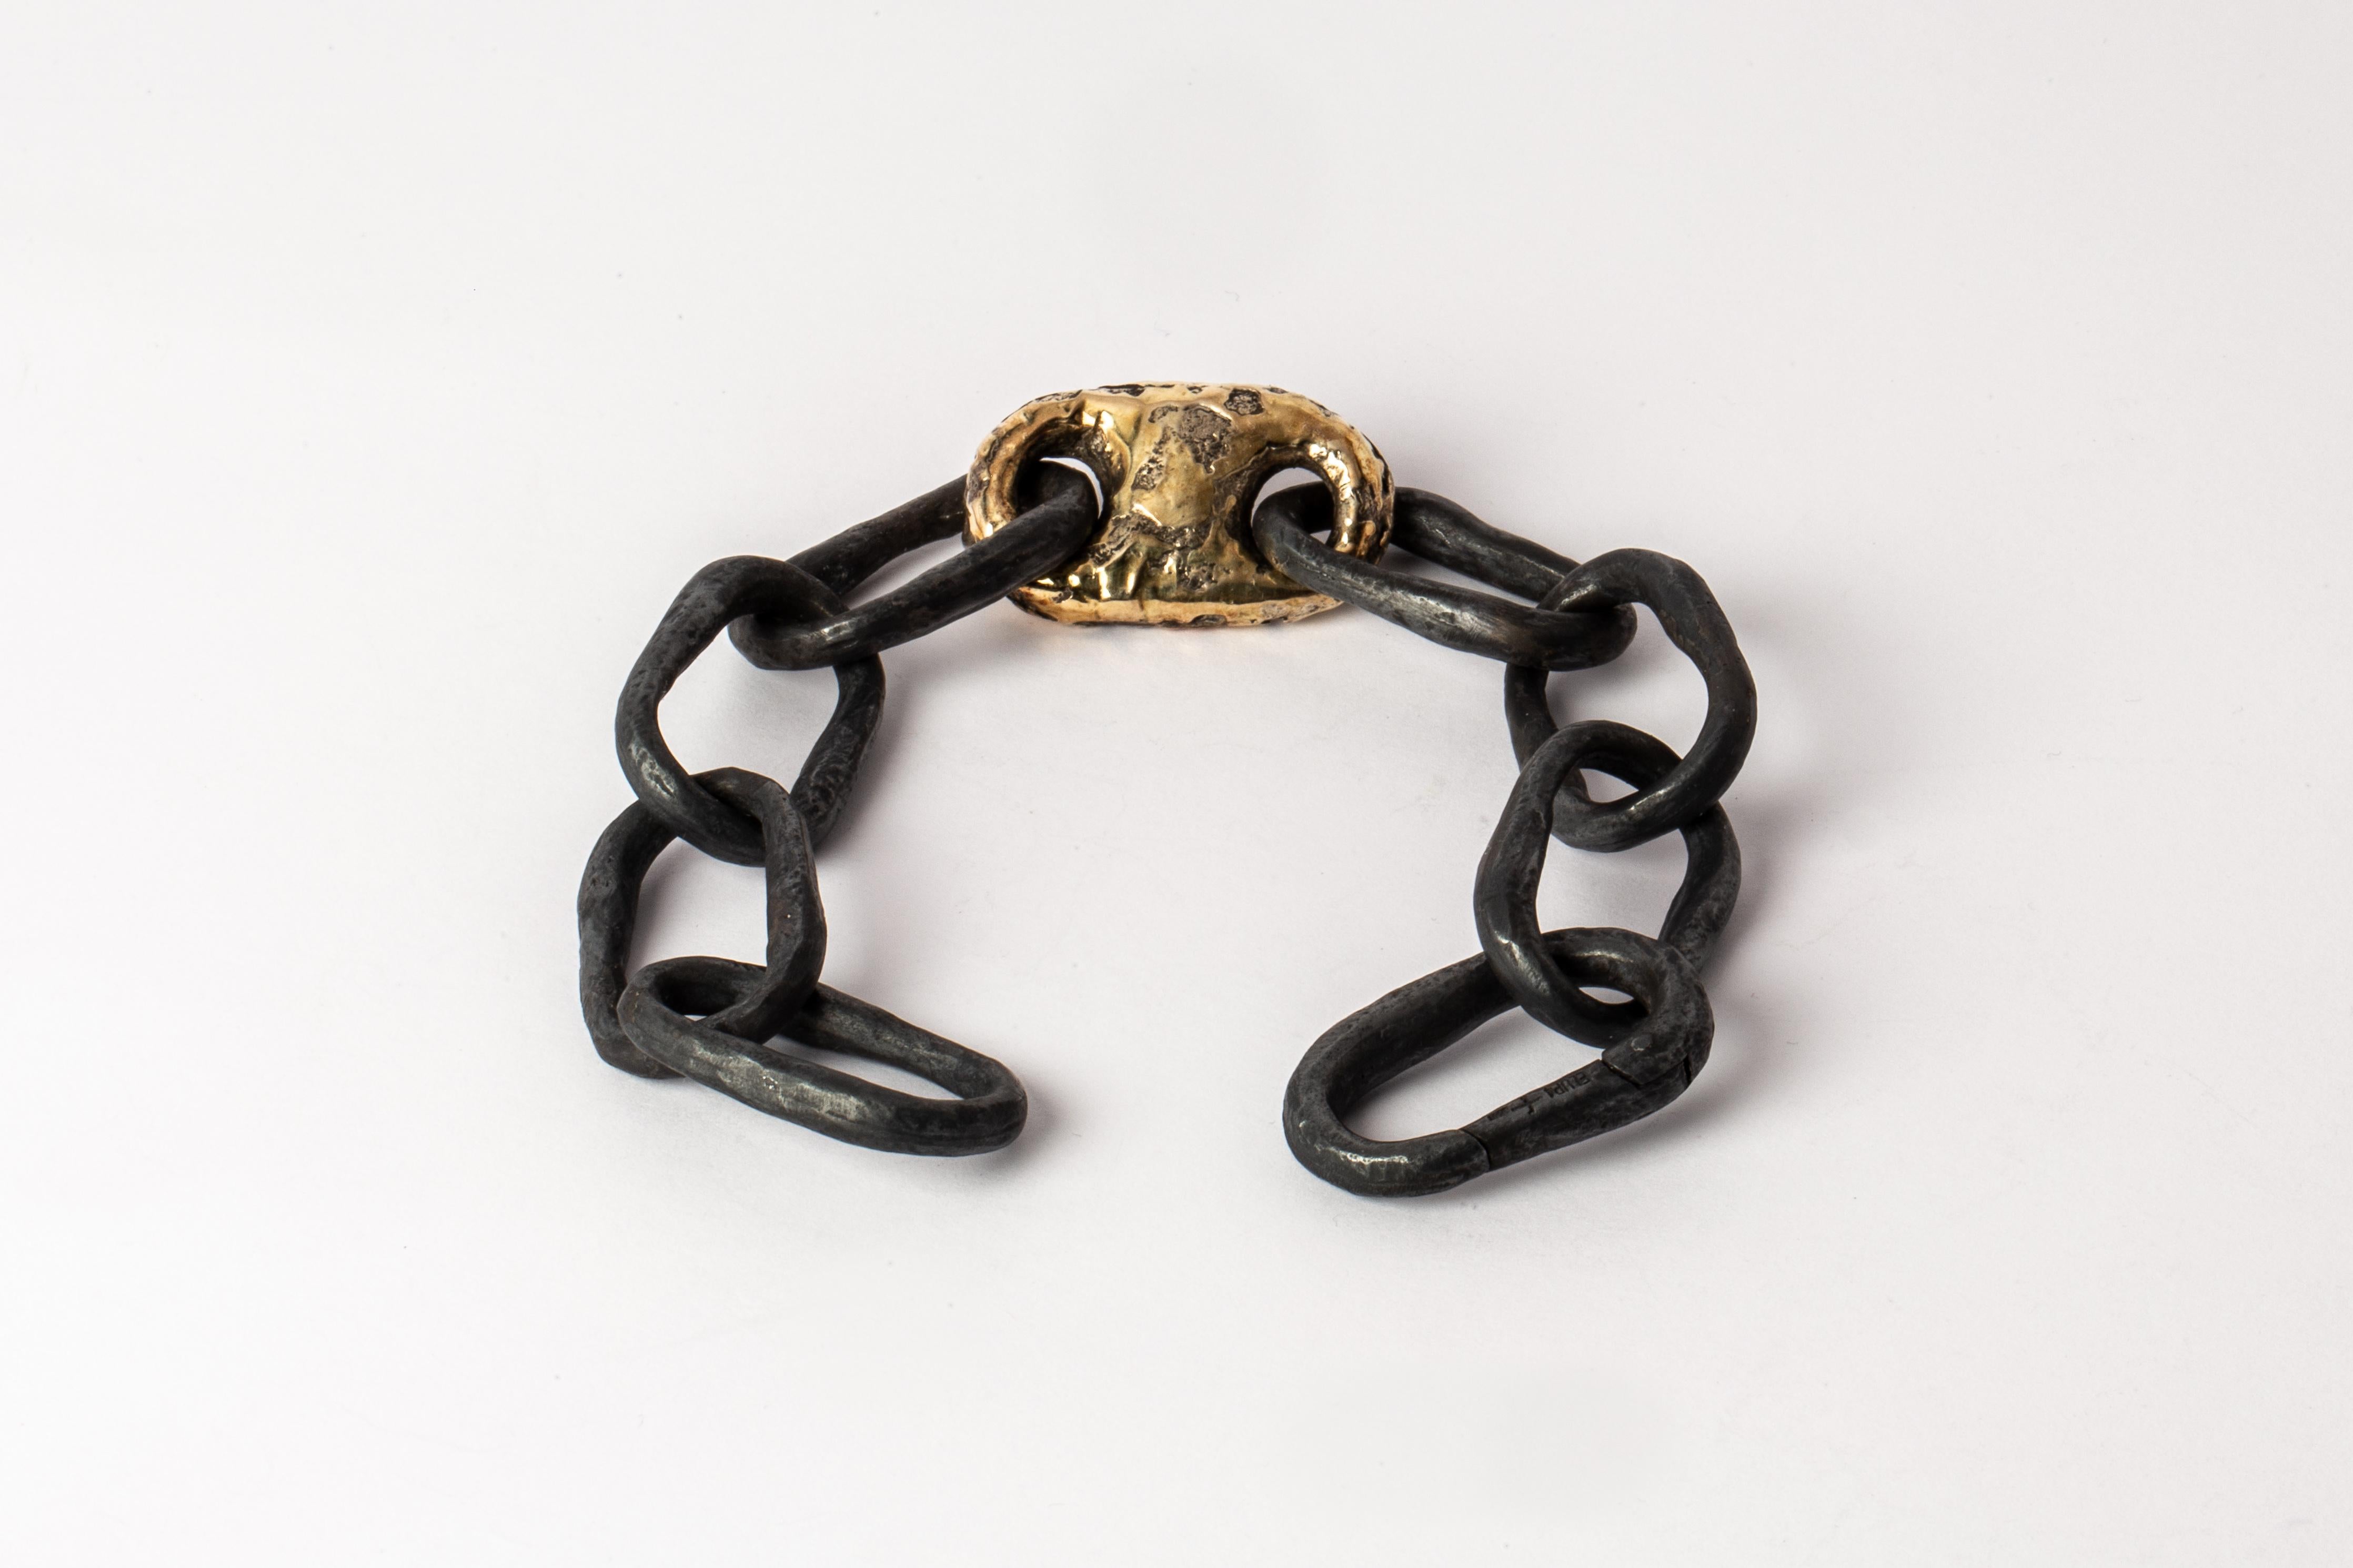 Roman Small Link Bracelet w/ Small Closed Link (Fuse, KA+DA18K) In New Condition For Sale In Hong Kong, Hong Kong Island